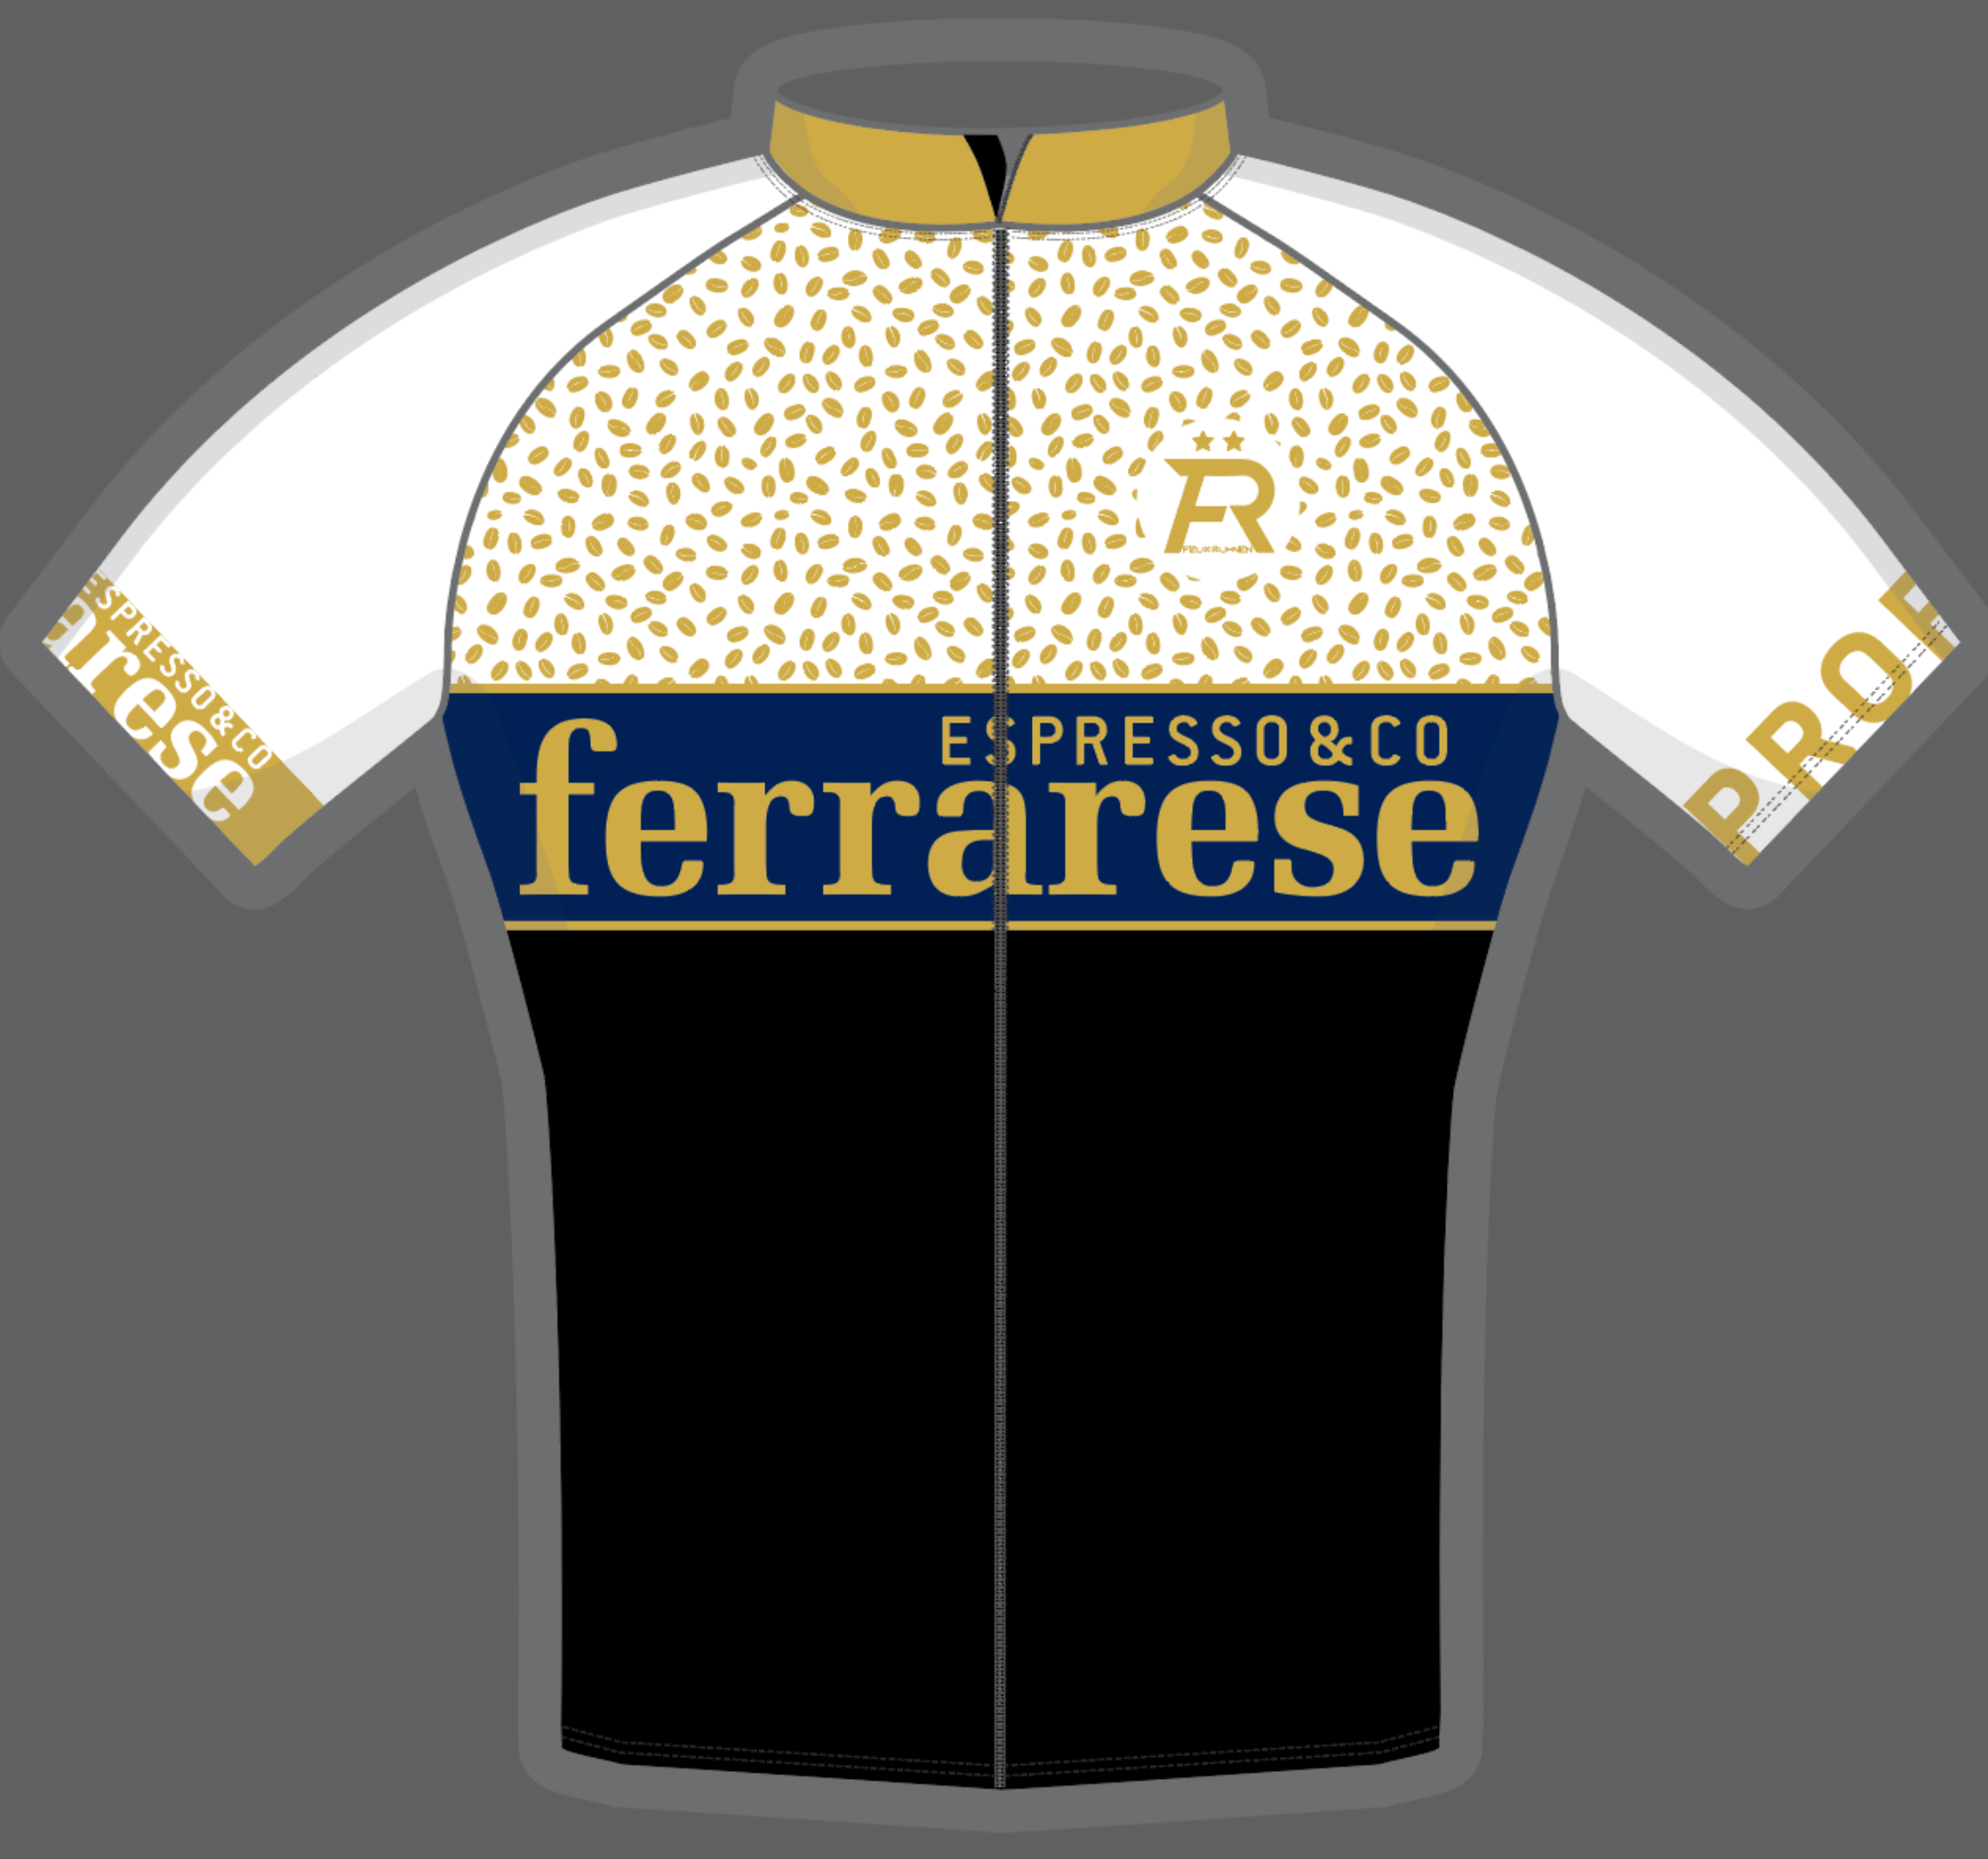 Unser personalisiertes "Espresso & Ferrarese" Cycling Kit